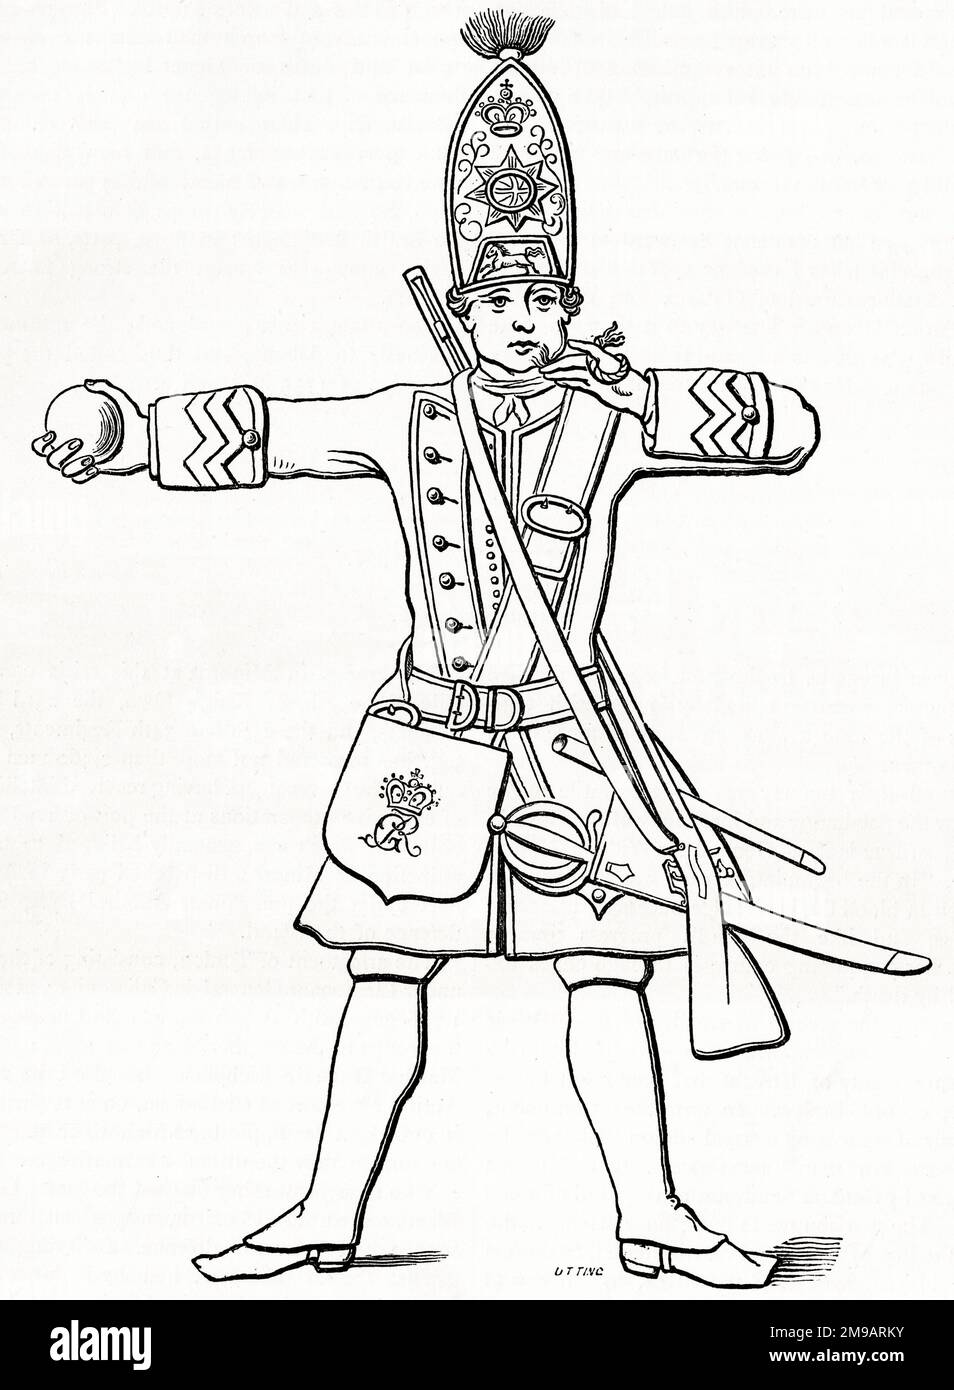 Grenadier of the Foot Guards with grenade and match alight, Battle of Prestonpans (or Battle of Gladsmuir), East Lothian, Scotland, 21 September 1745, during the Jacobite Rising. Stock Photo